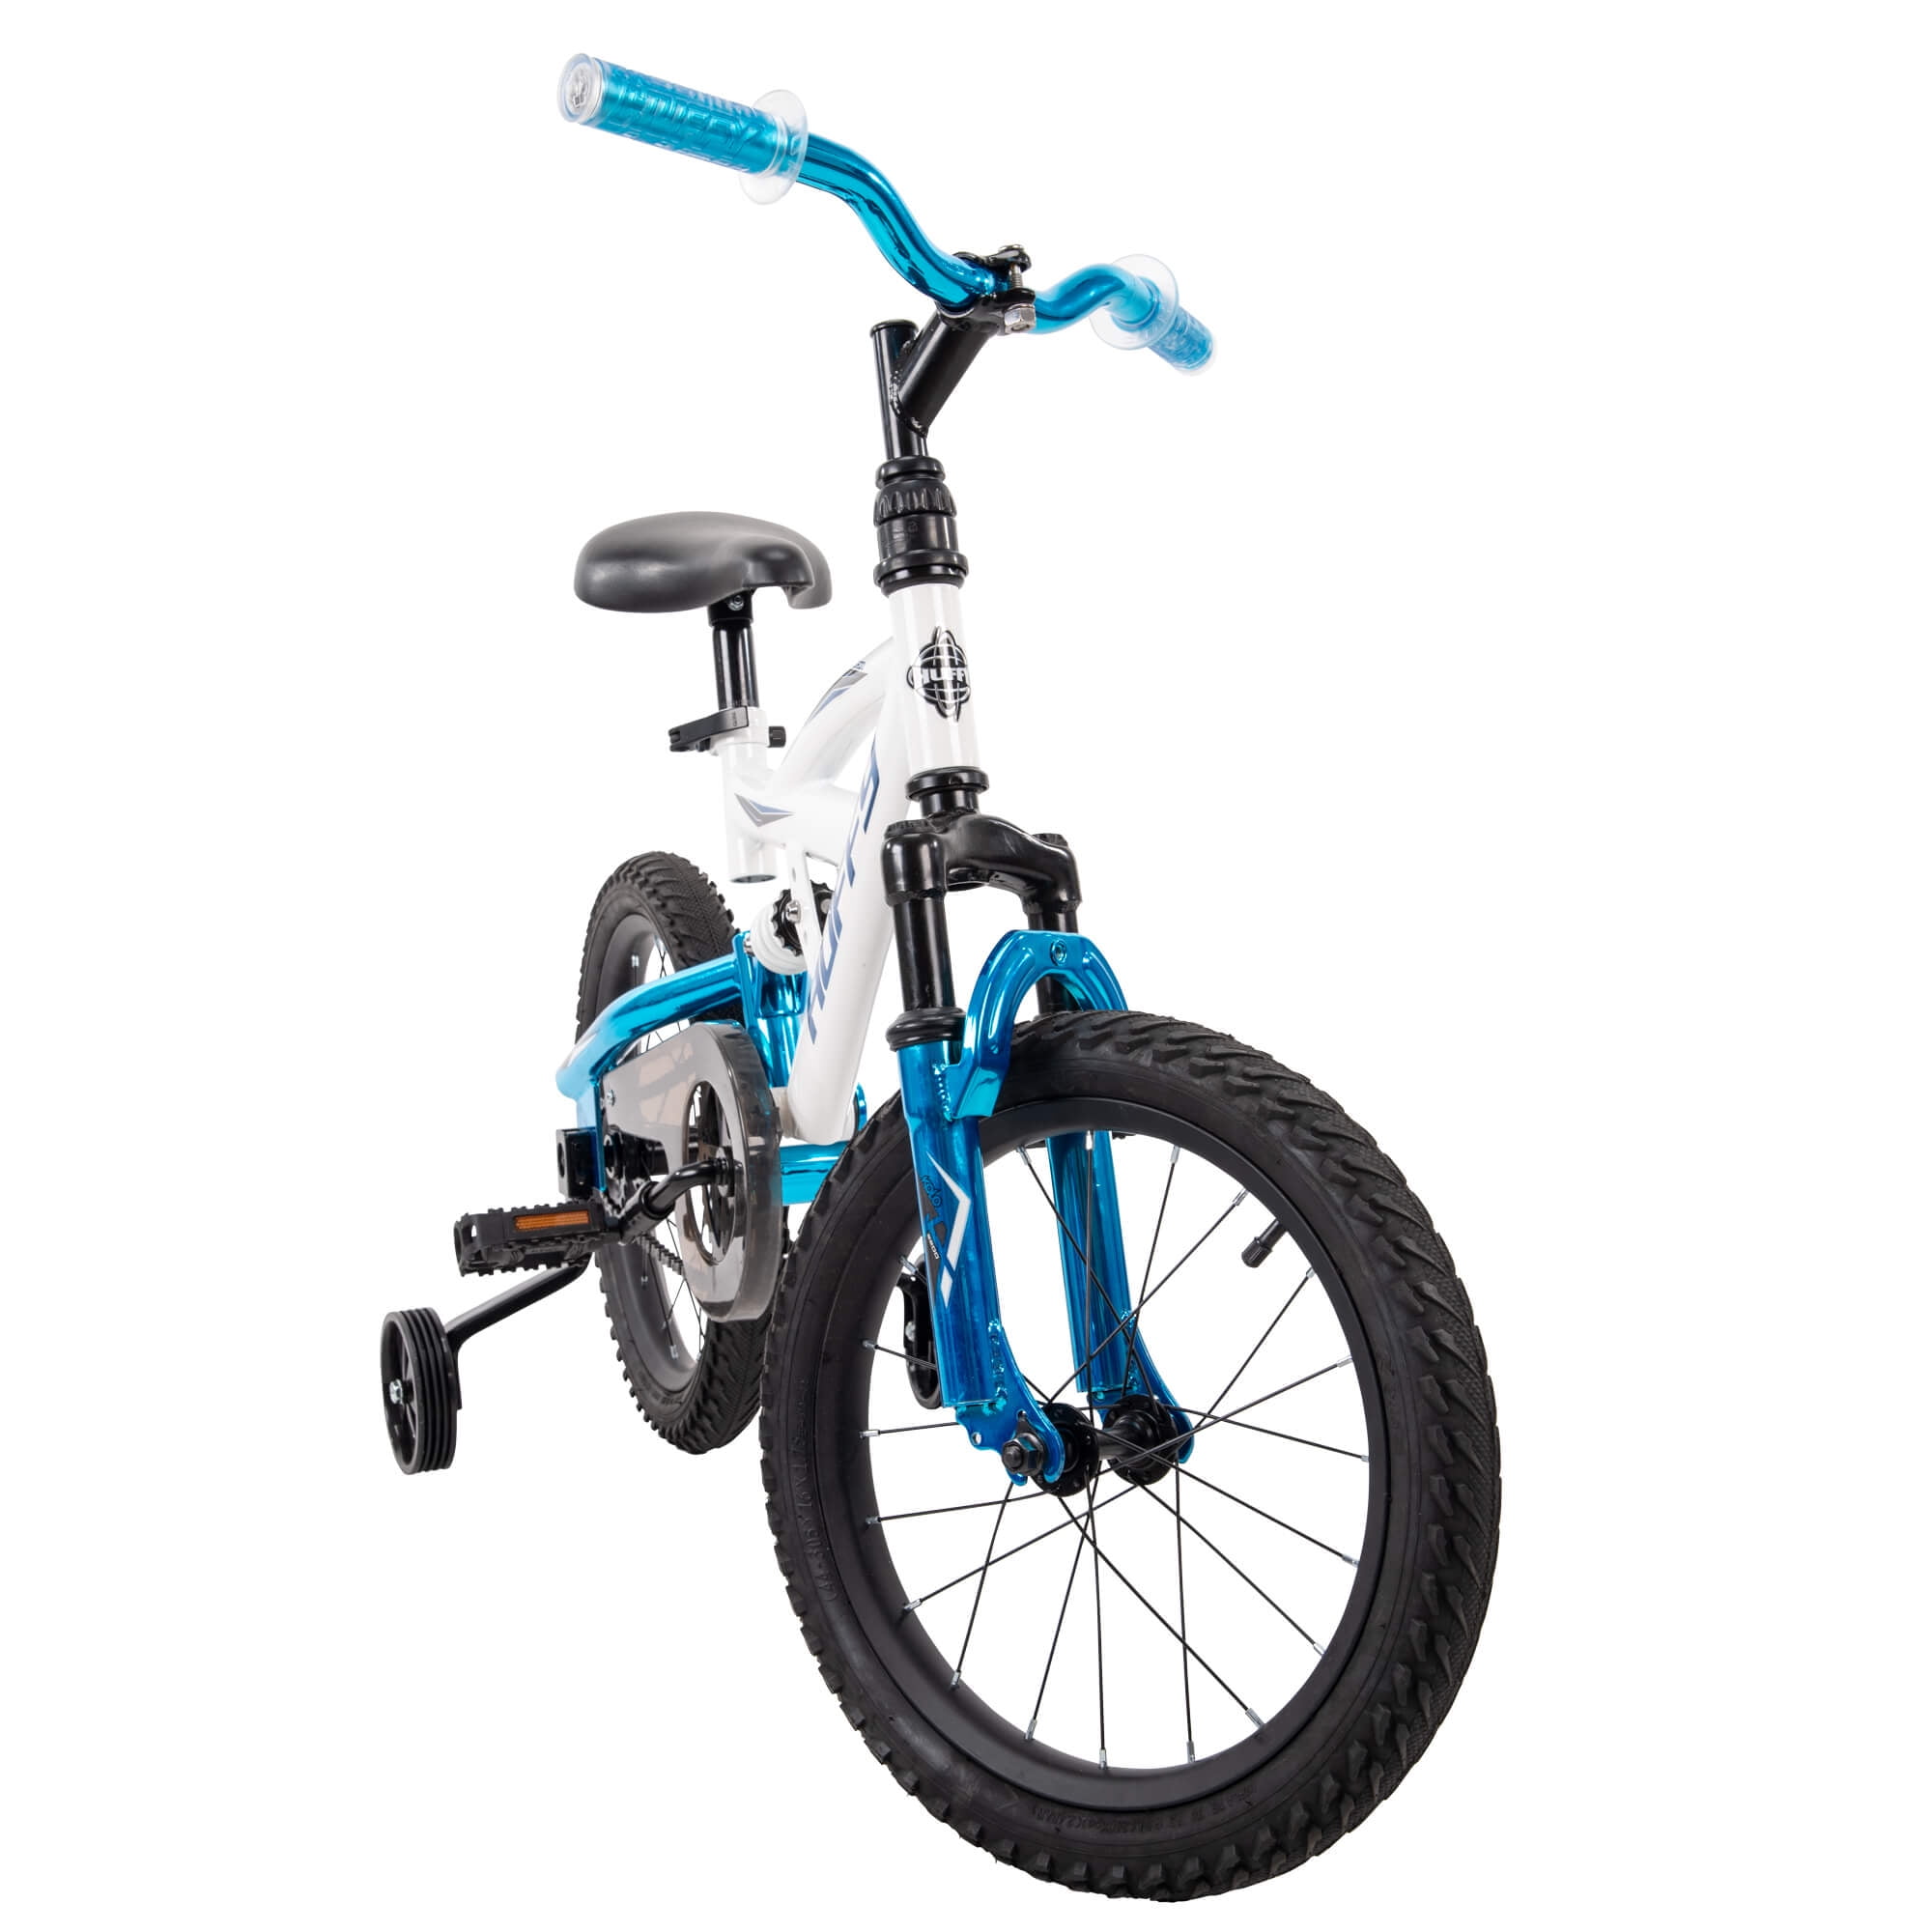 HFY Unique,Stylish and Eye Catching 16 DS 1600 Boys Bike for Kids with EZ Build,White,with Training Wheels,Padded and Adjustable Seat Exciting Gift Idea for Kids 